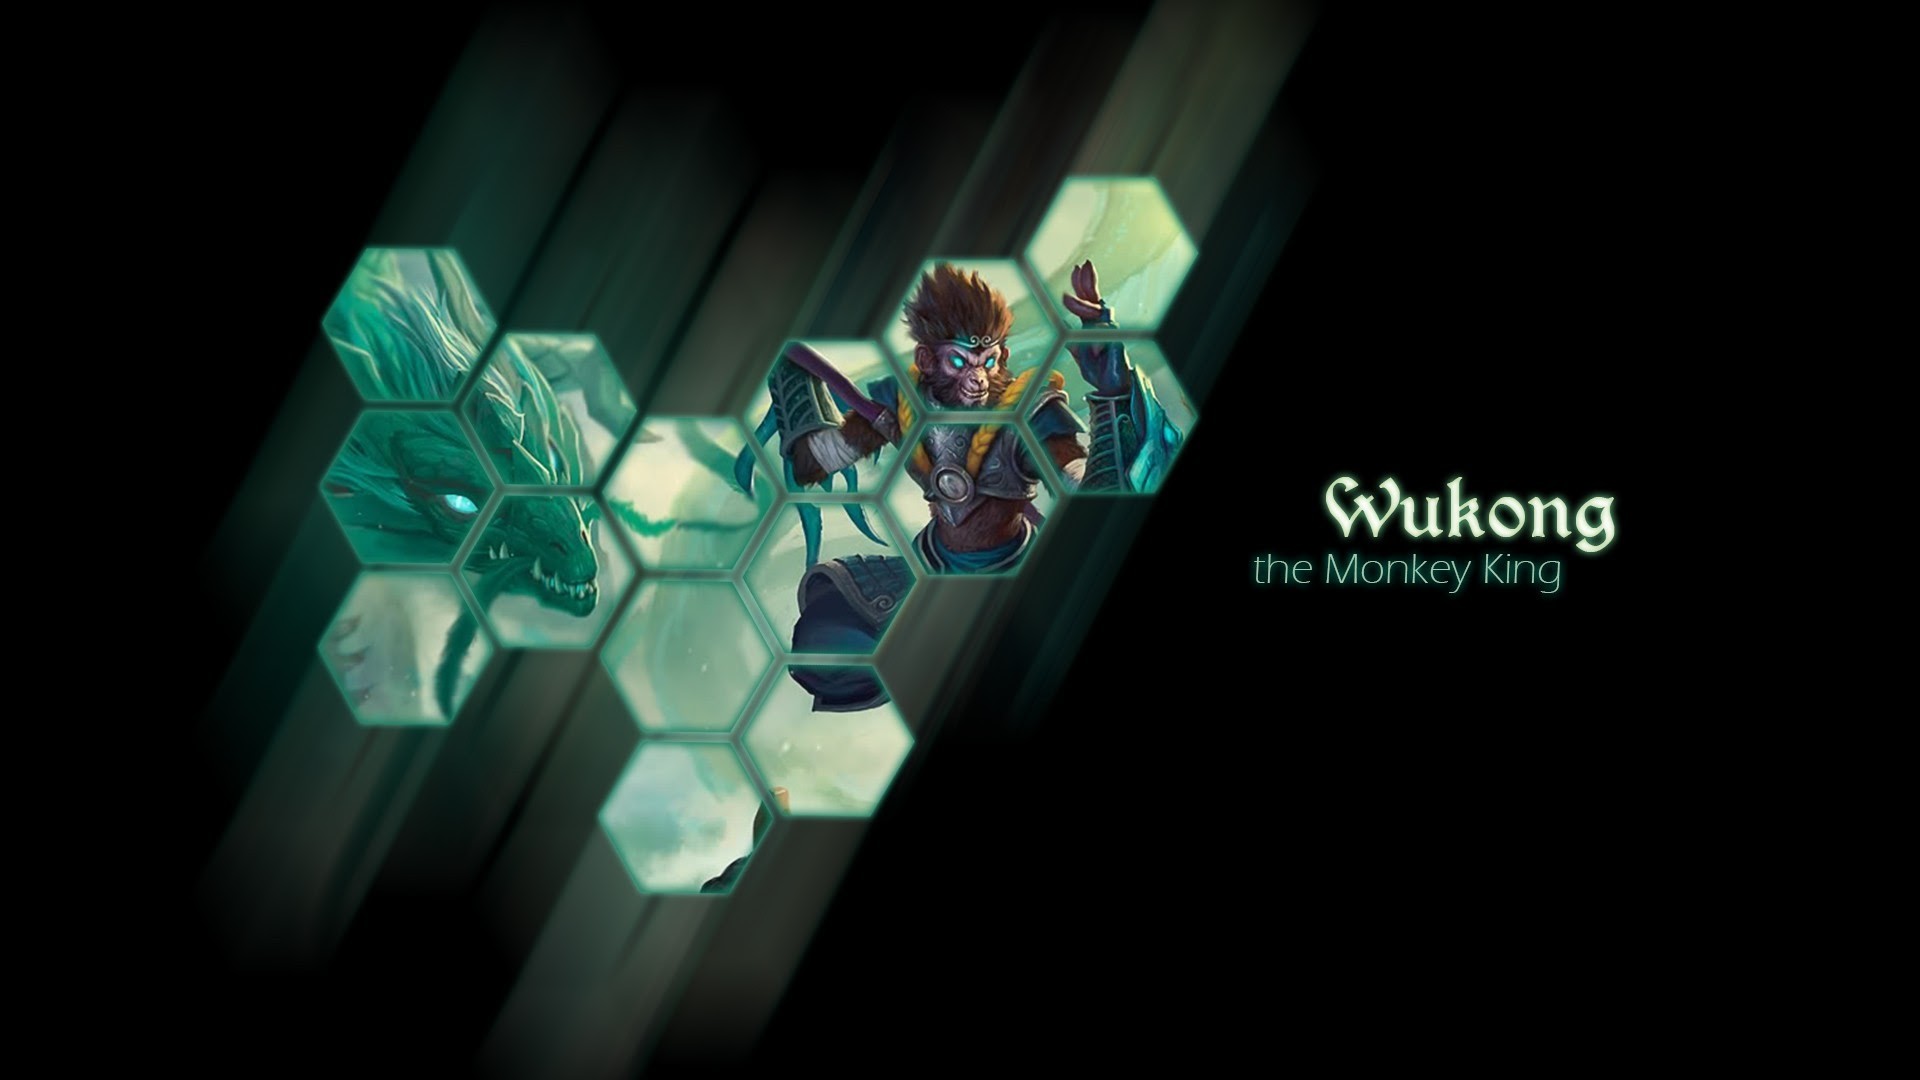 1920x1080 Wukong Lol Full Hd Game wallpaper by chococruise RevelWallpapers